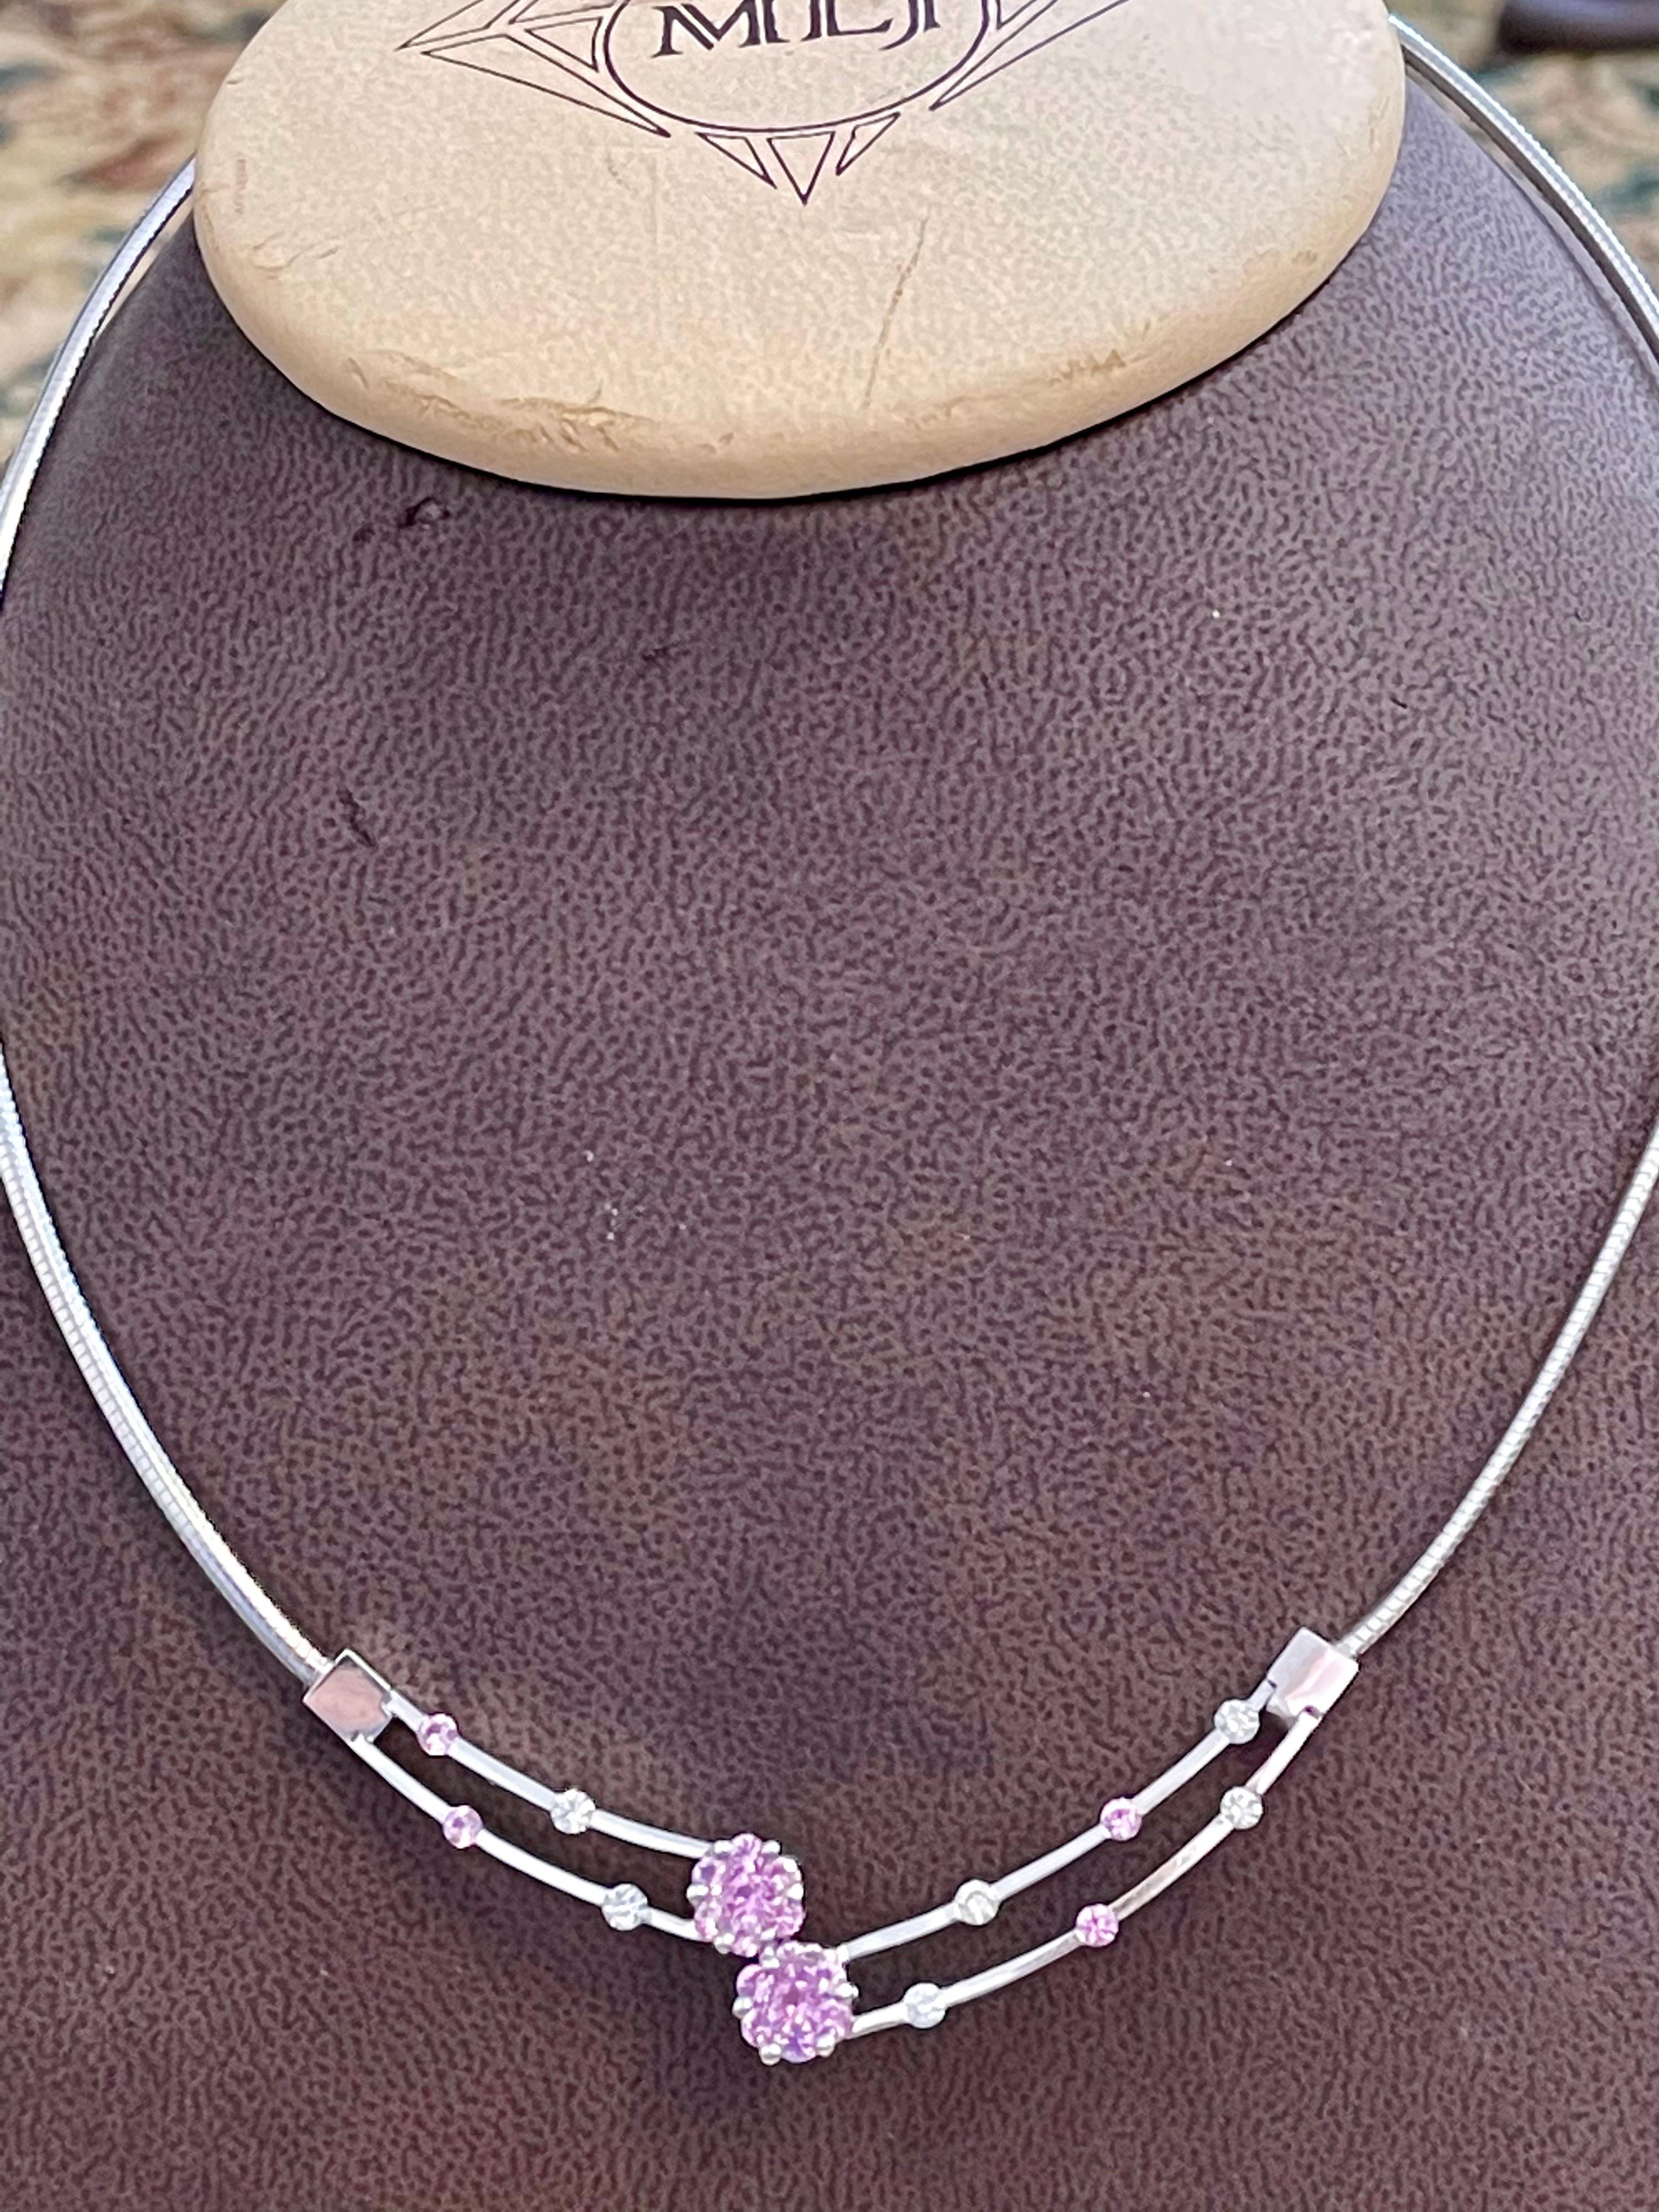 18 carats of pink sapphire neclace